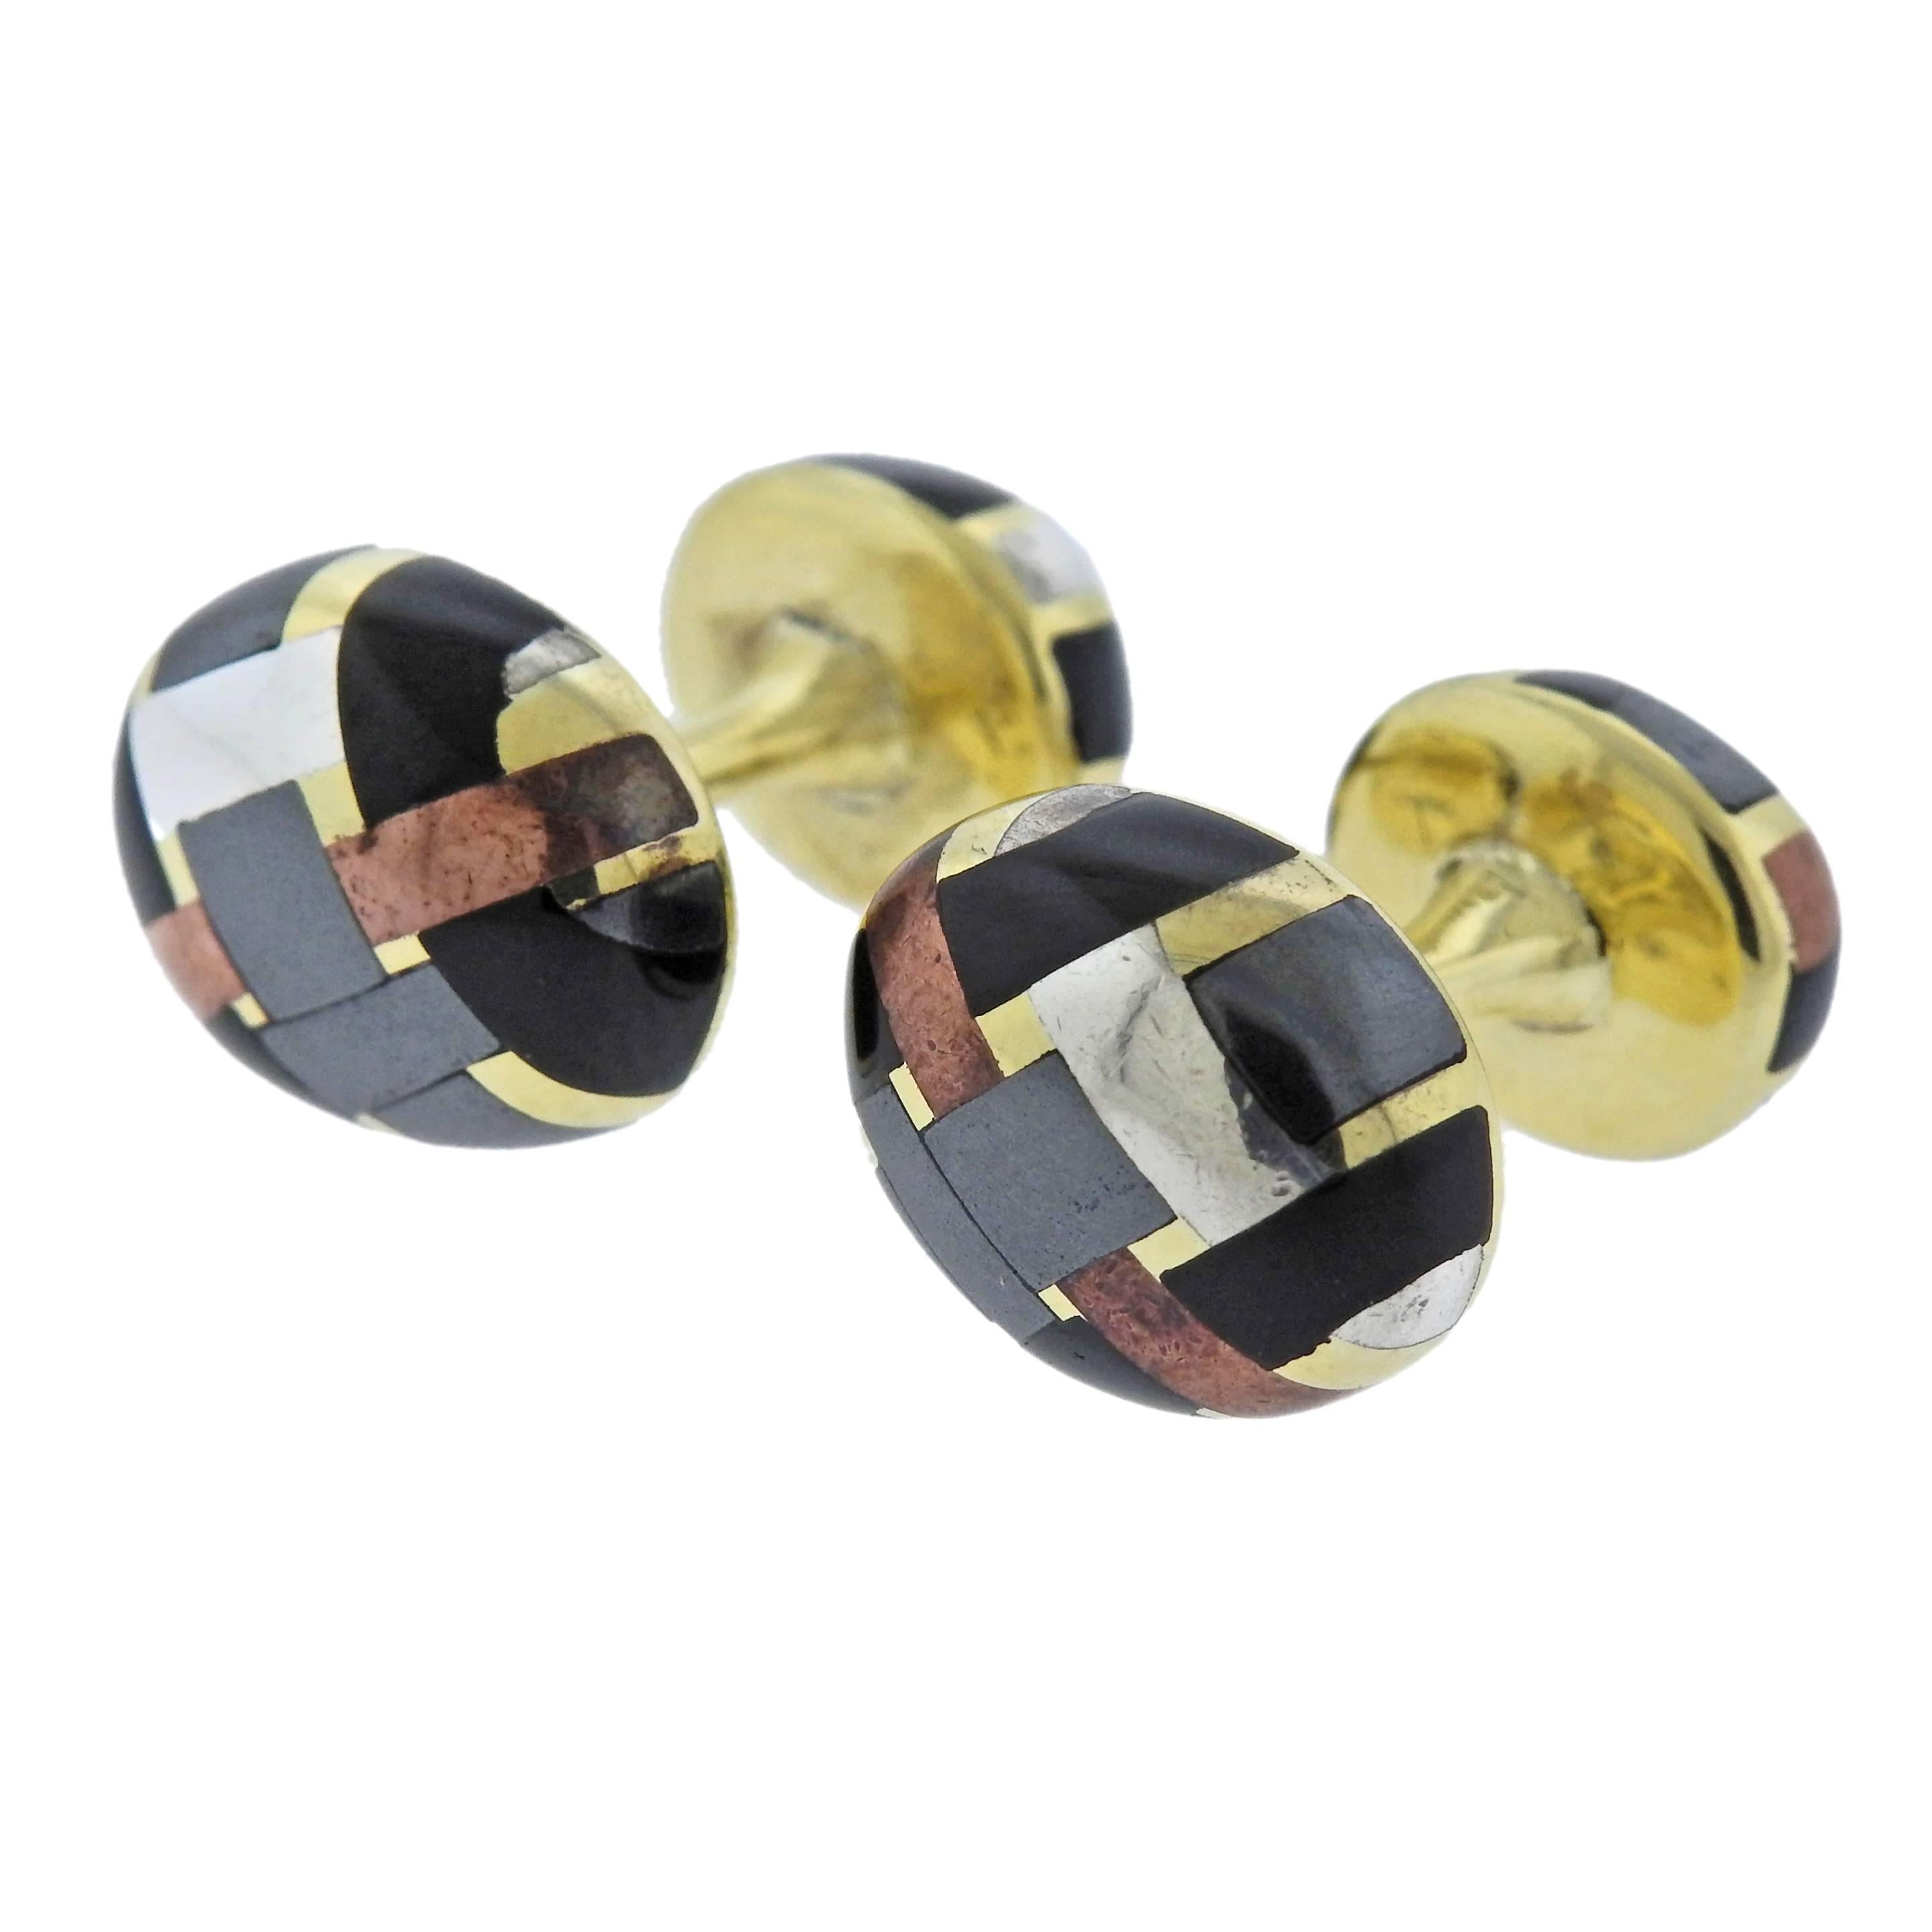 Pair of mixed metal cufflinks, crafted by Angela Cummings in 1984. Cufflink top - 14.6mm x 11.7mm, back - 11.6mm x 9.4mm, weigh 14.4 grams. Marked: 18k, 1984, Angela Cummings.